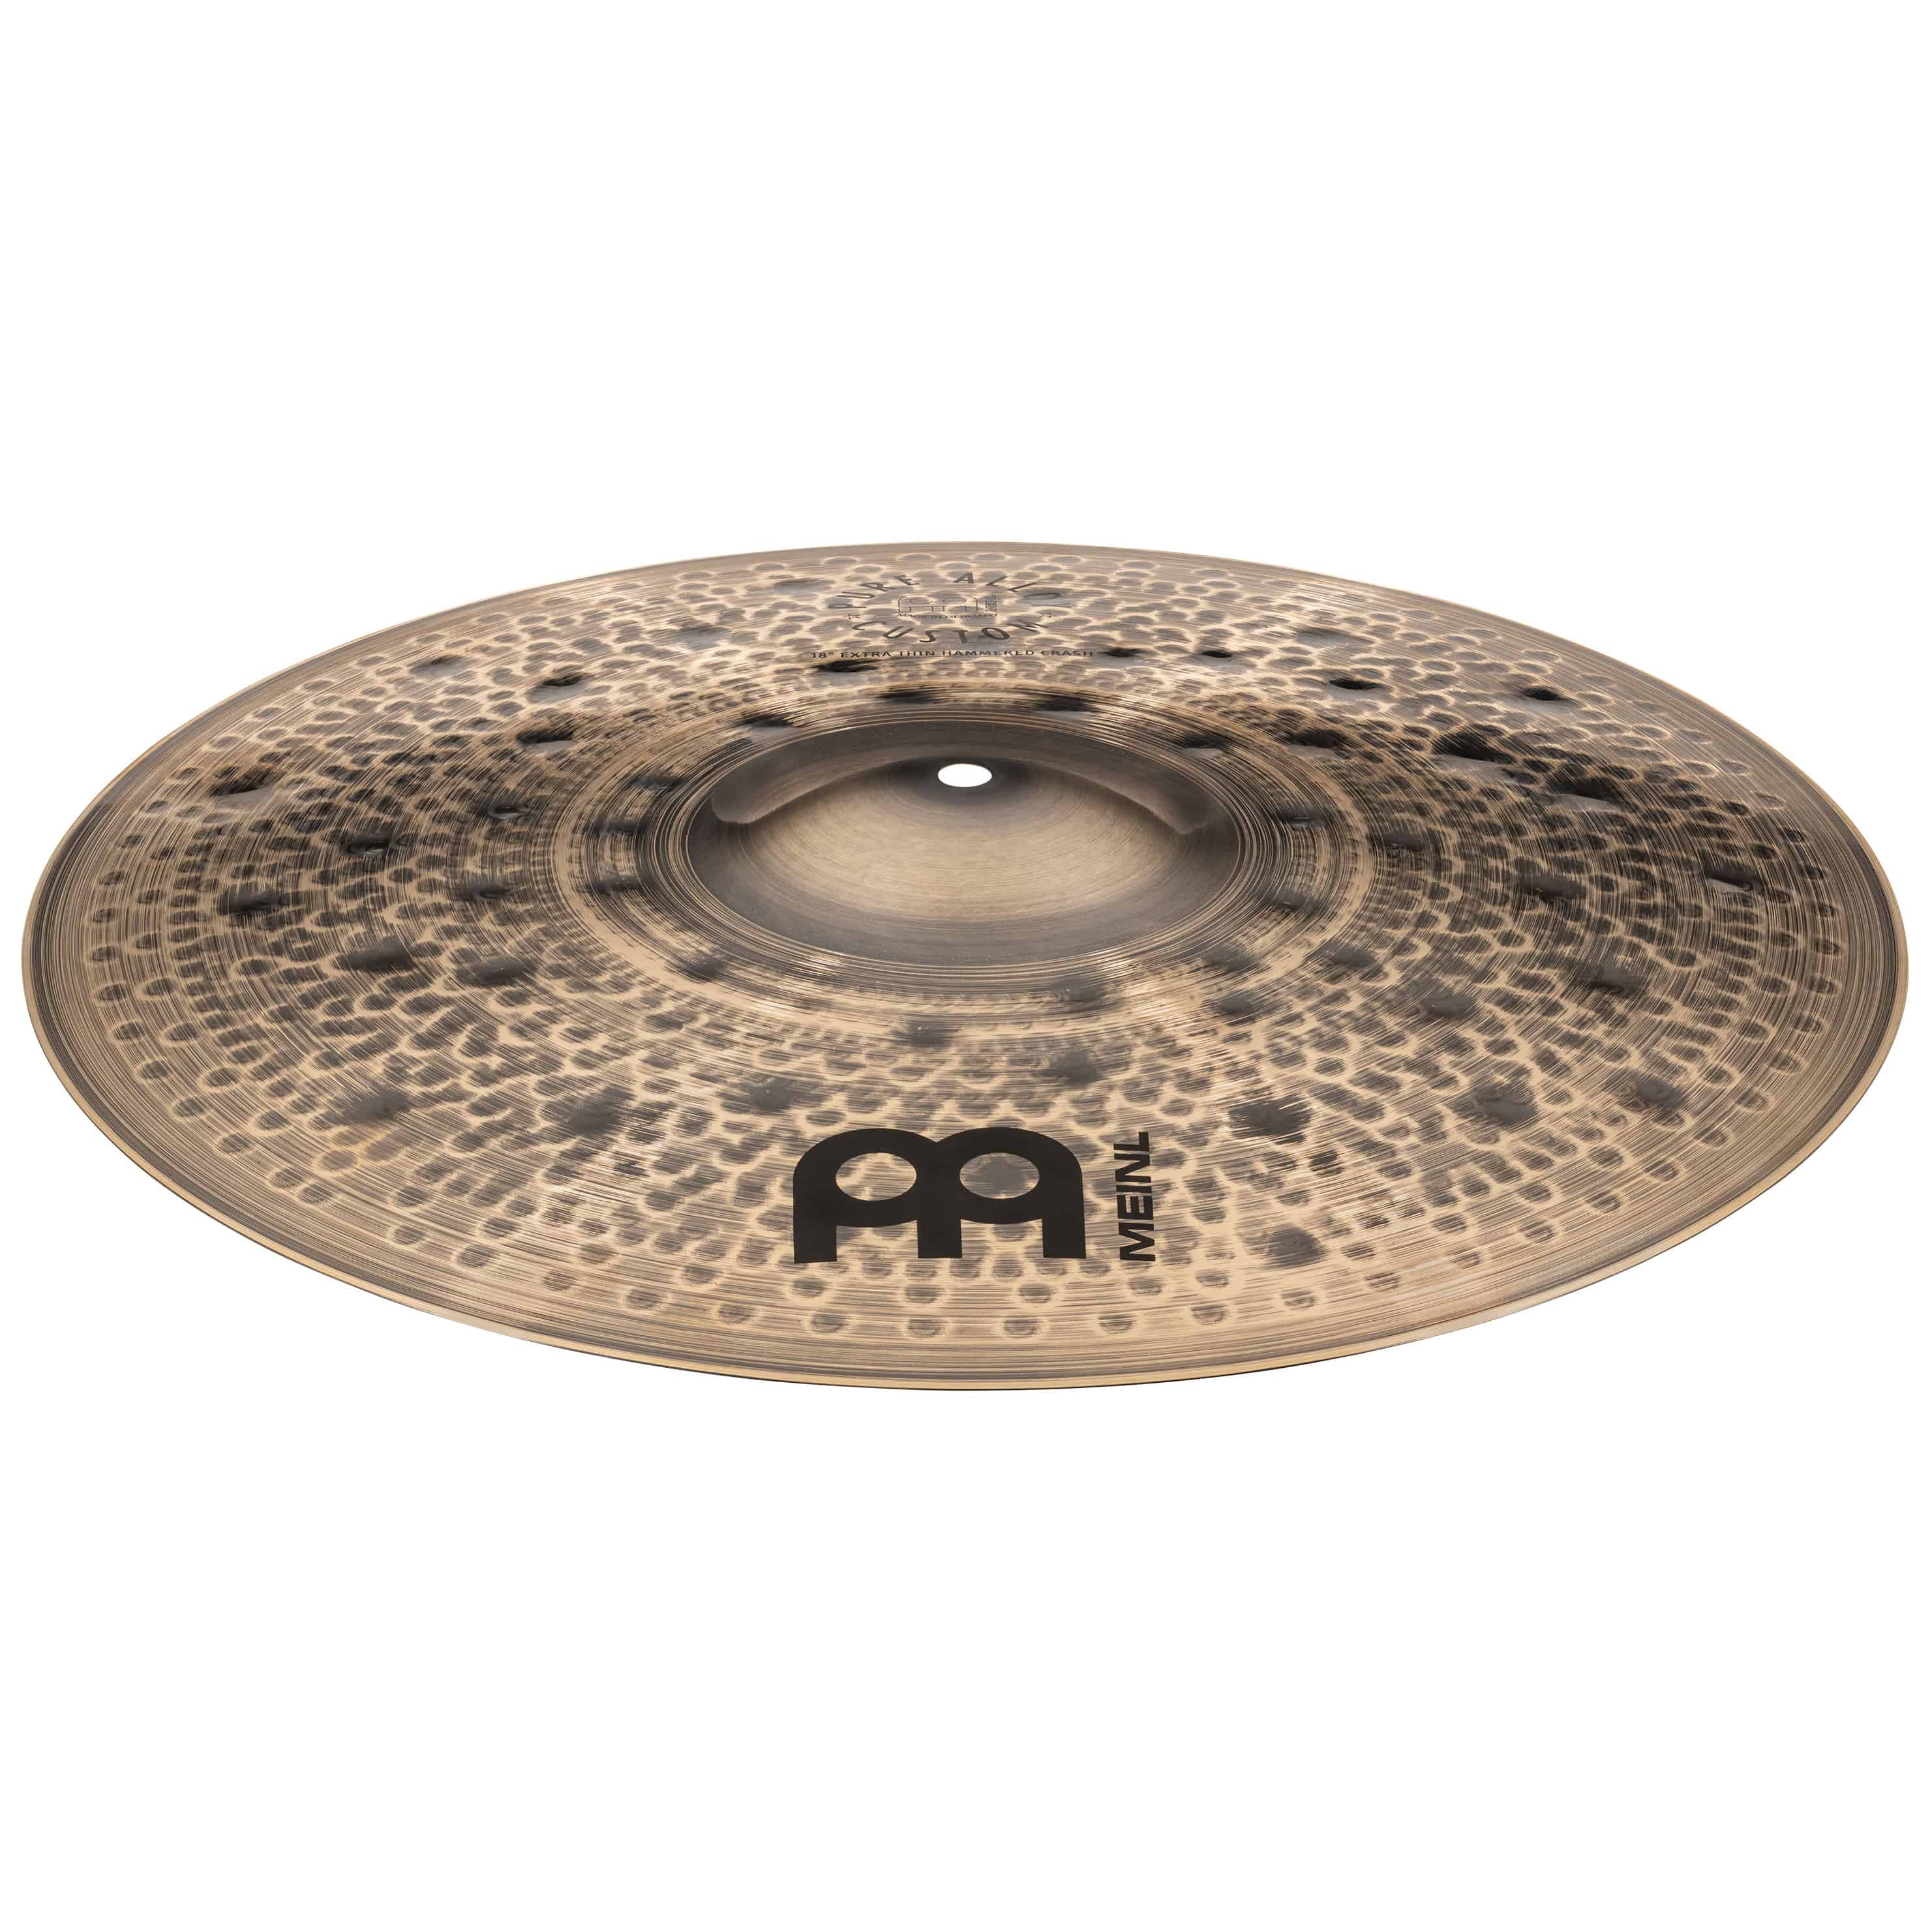 Meinl Cymbals PAC18ETHC - 18" Pure Alloy Custom Extra Thin Hammered Crash 2